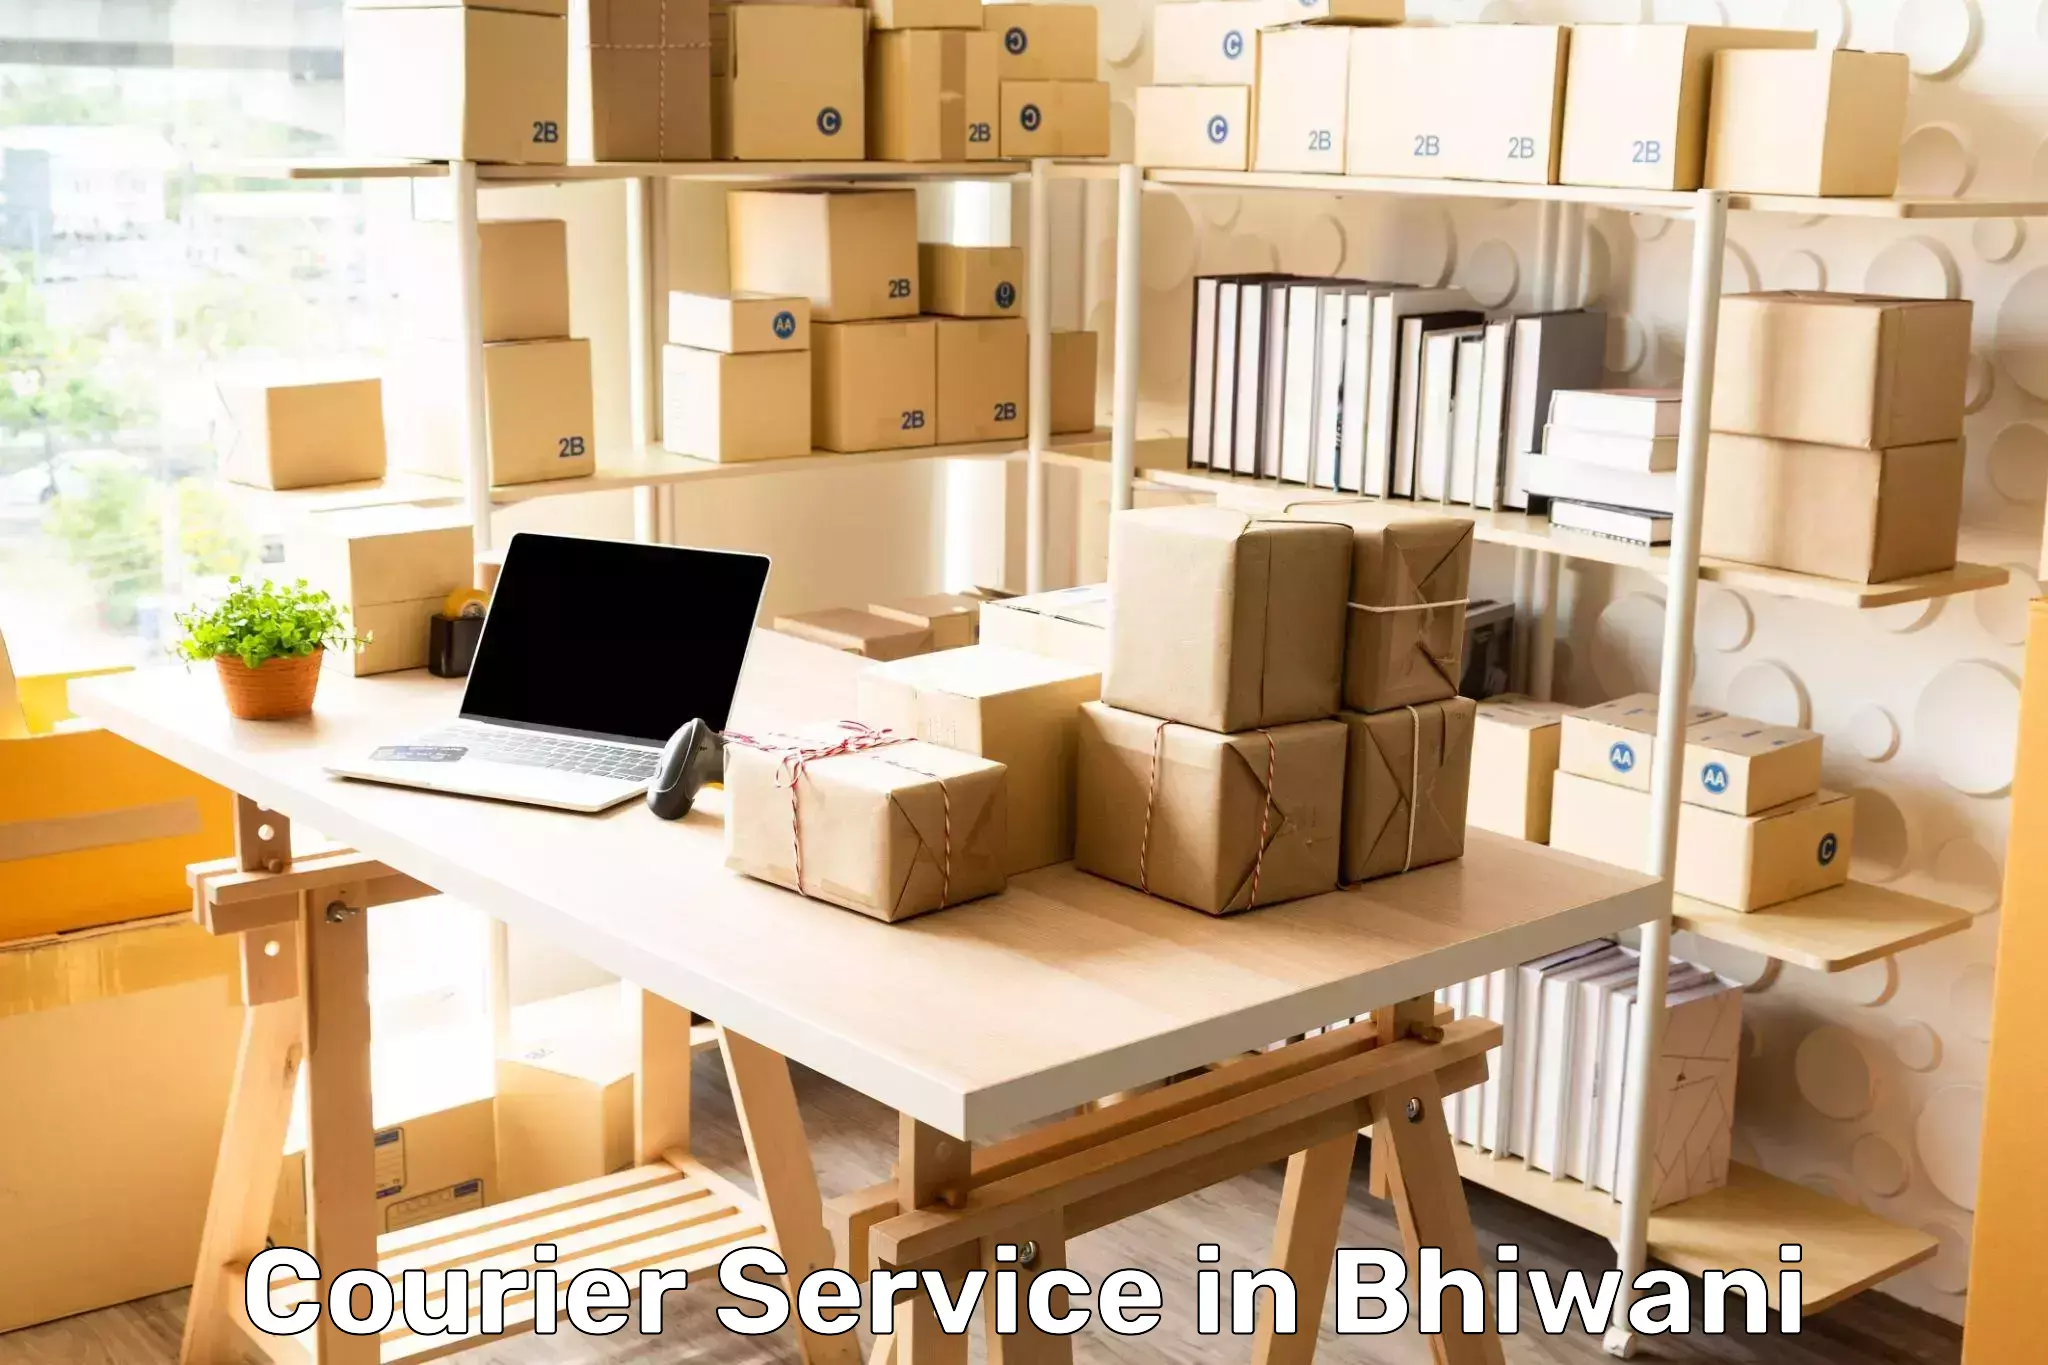 Seamless shipping experience in Bhiwani